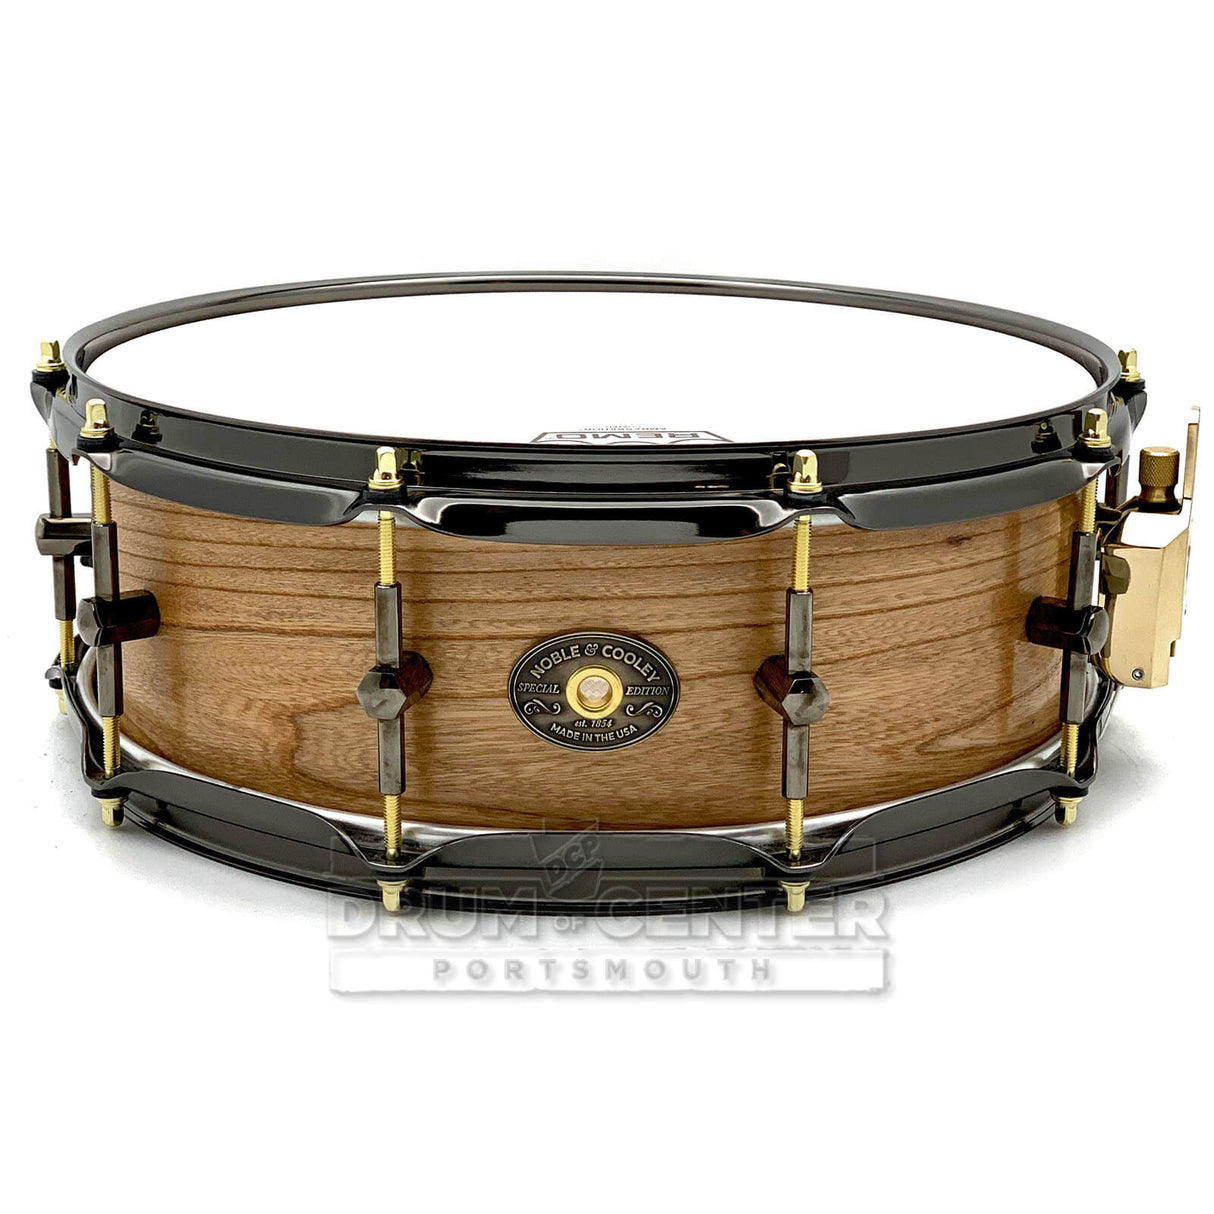 Noble & Cooley Solid Shell Classic Limited Edition Hackberry Snare Drum 14x5 - Drum Center Of Portsmouth